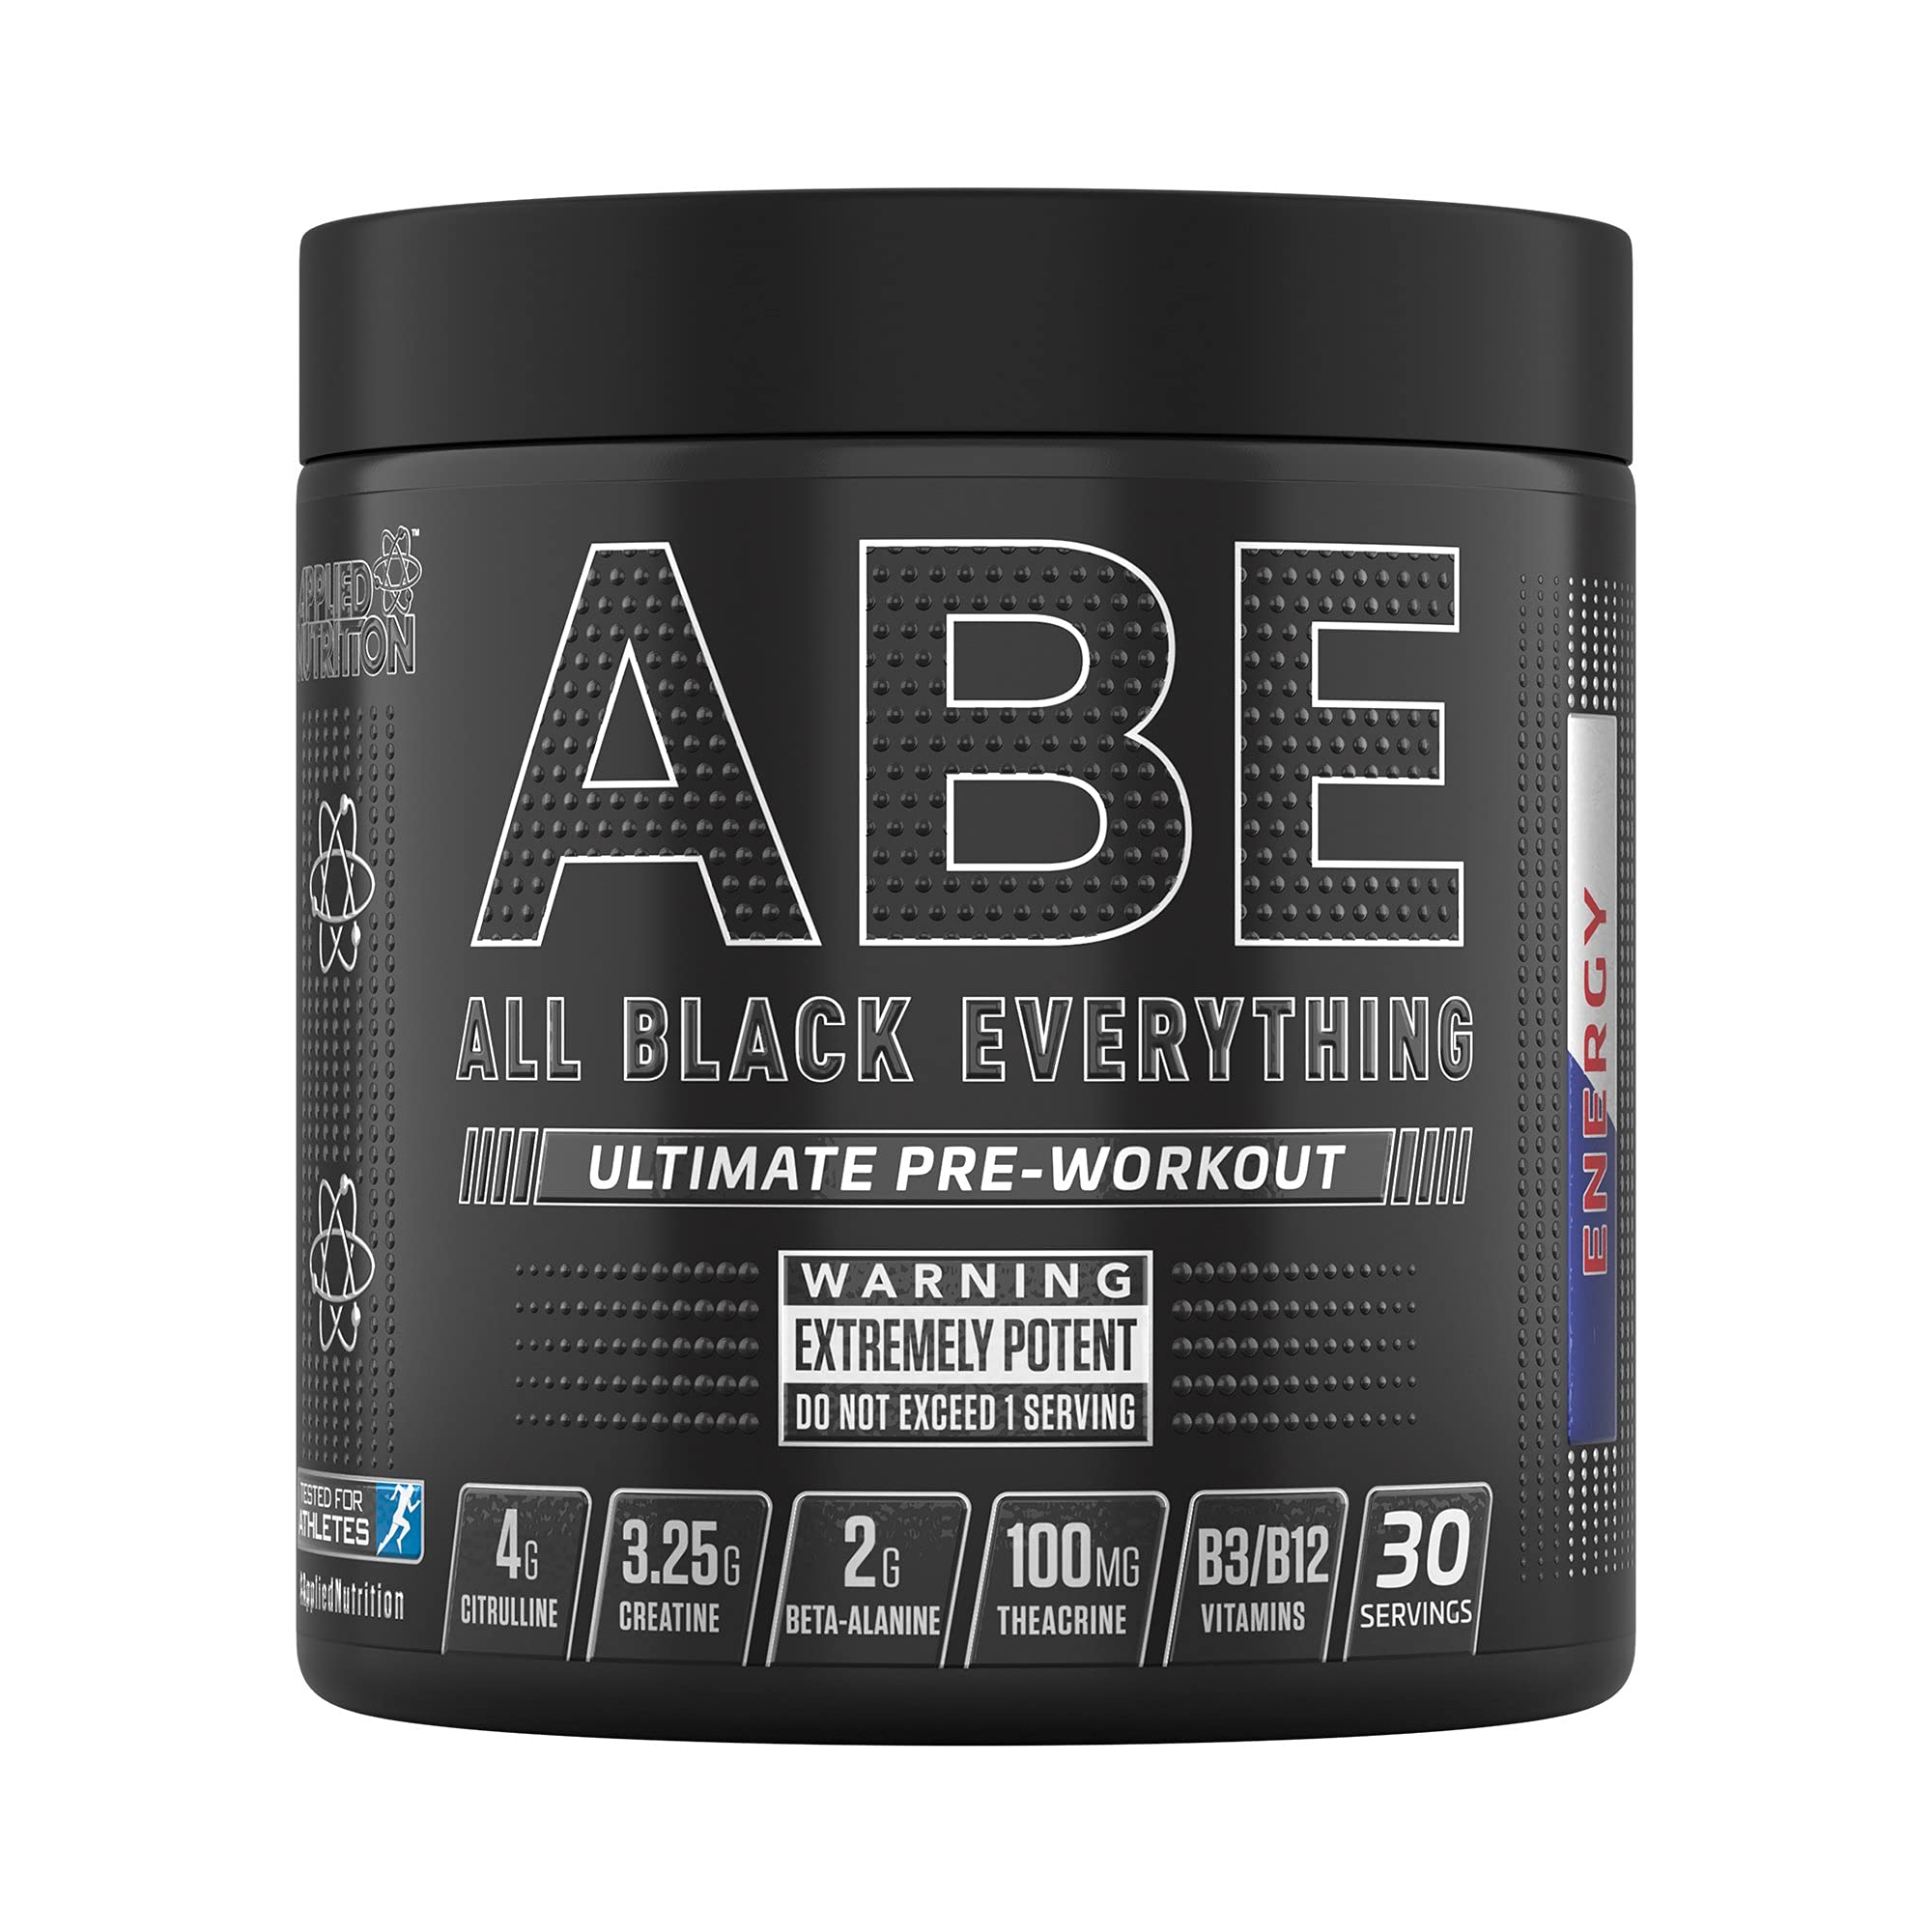 Applied Nutrition ABE Pre Workout - ABE All Black Everything Pre Workout Powder, Energy & Physical Performance with Creatine, Beta Alanine, Caffeine, Citrulline - 315g, 30 Servings (Energy Flavour)